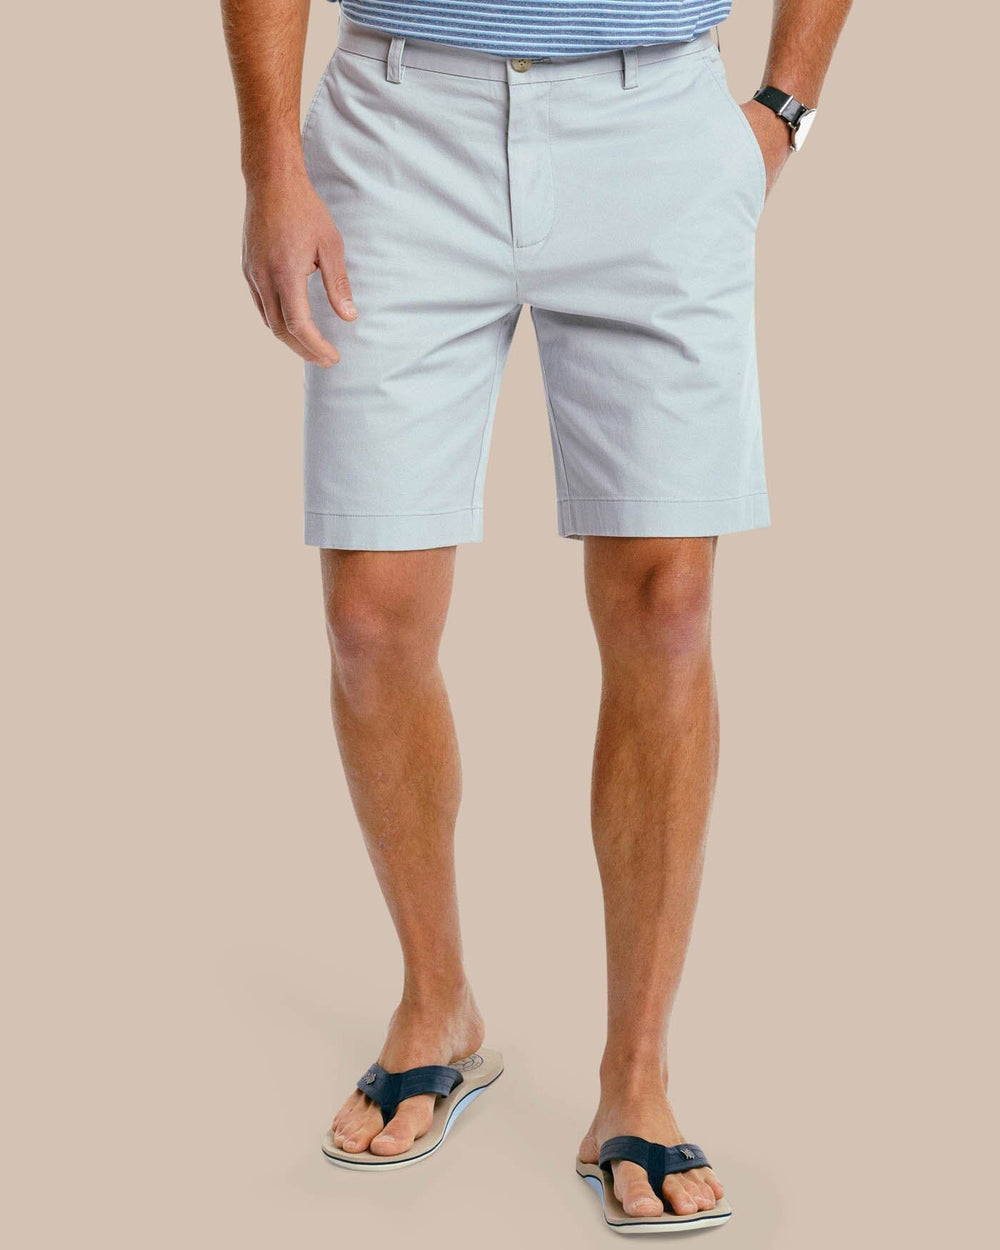 The front view of the Men's New Channel Marker 9 Inch Short by Southern Tide - Seagull Grey